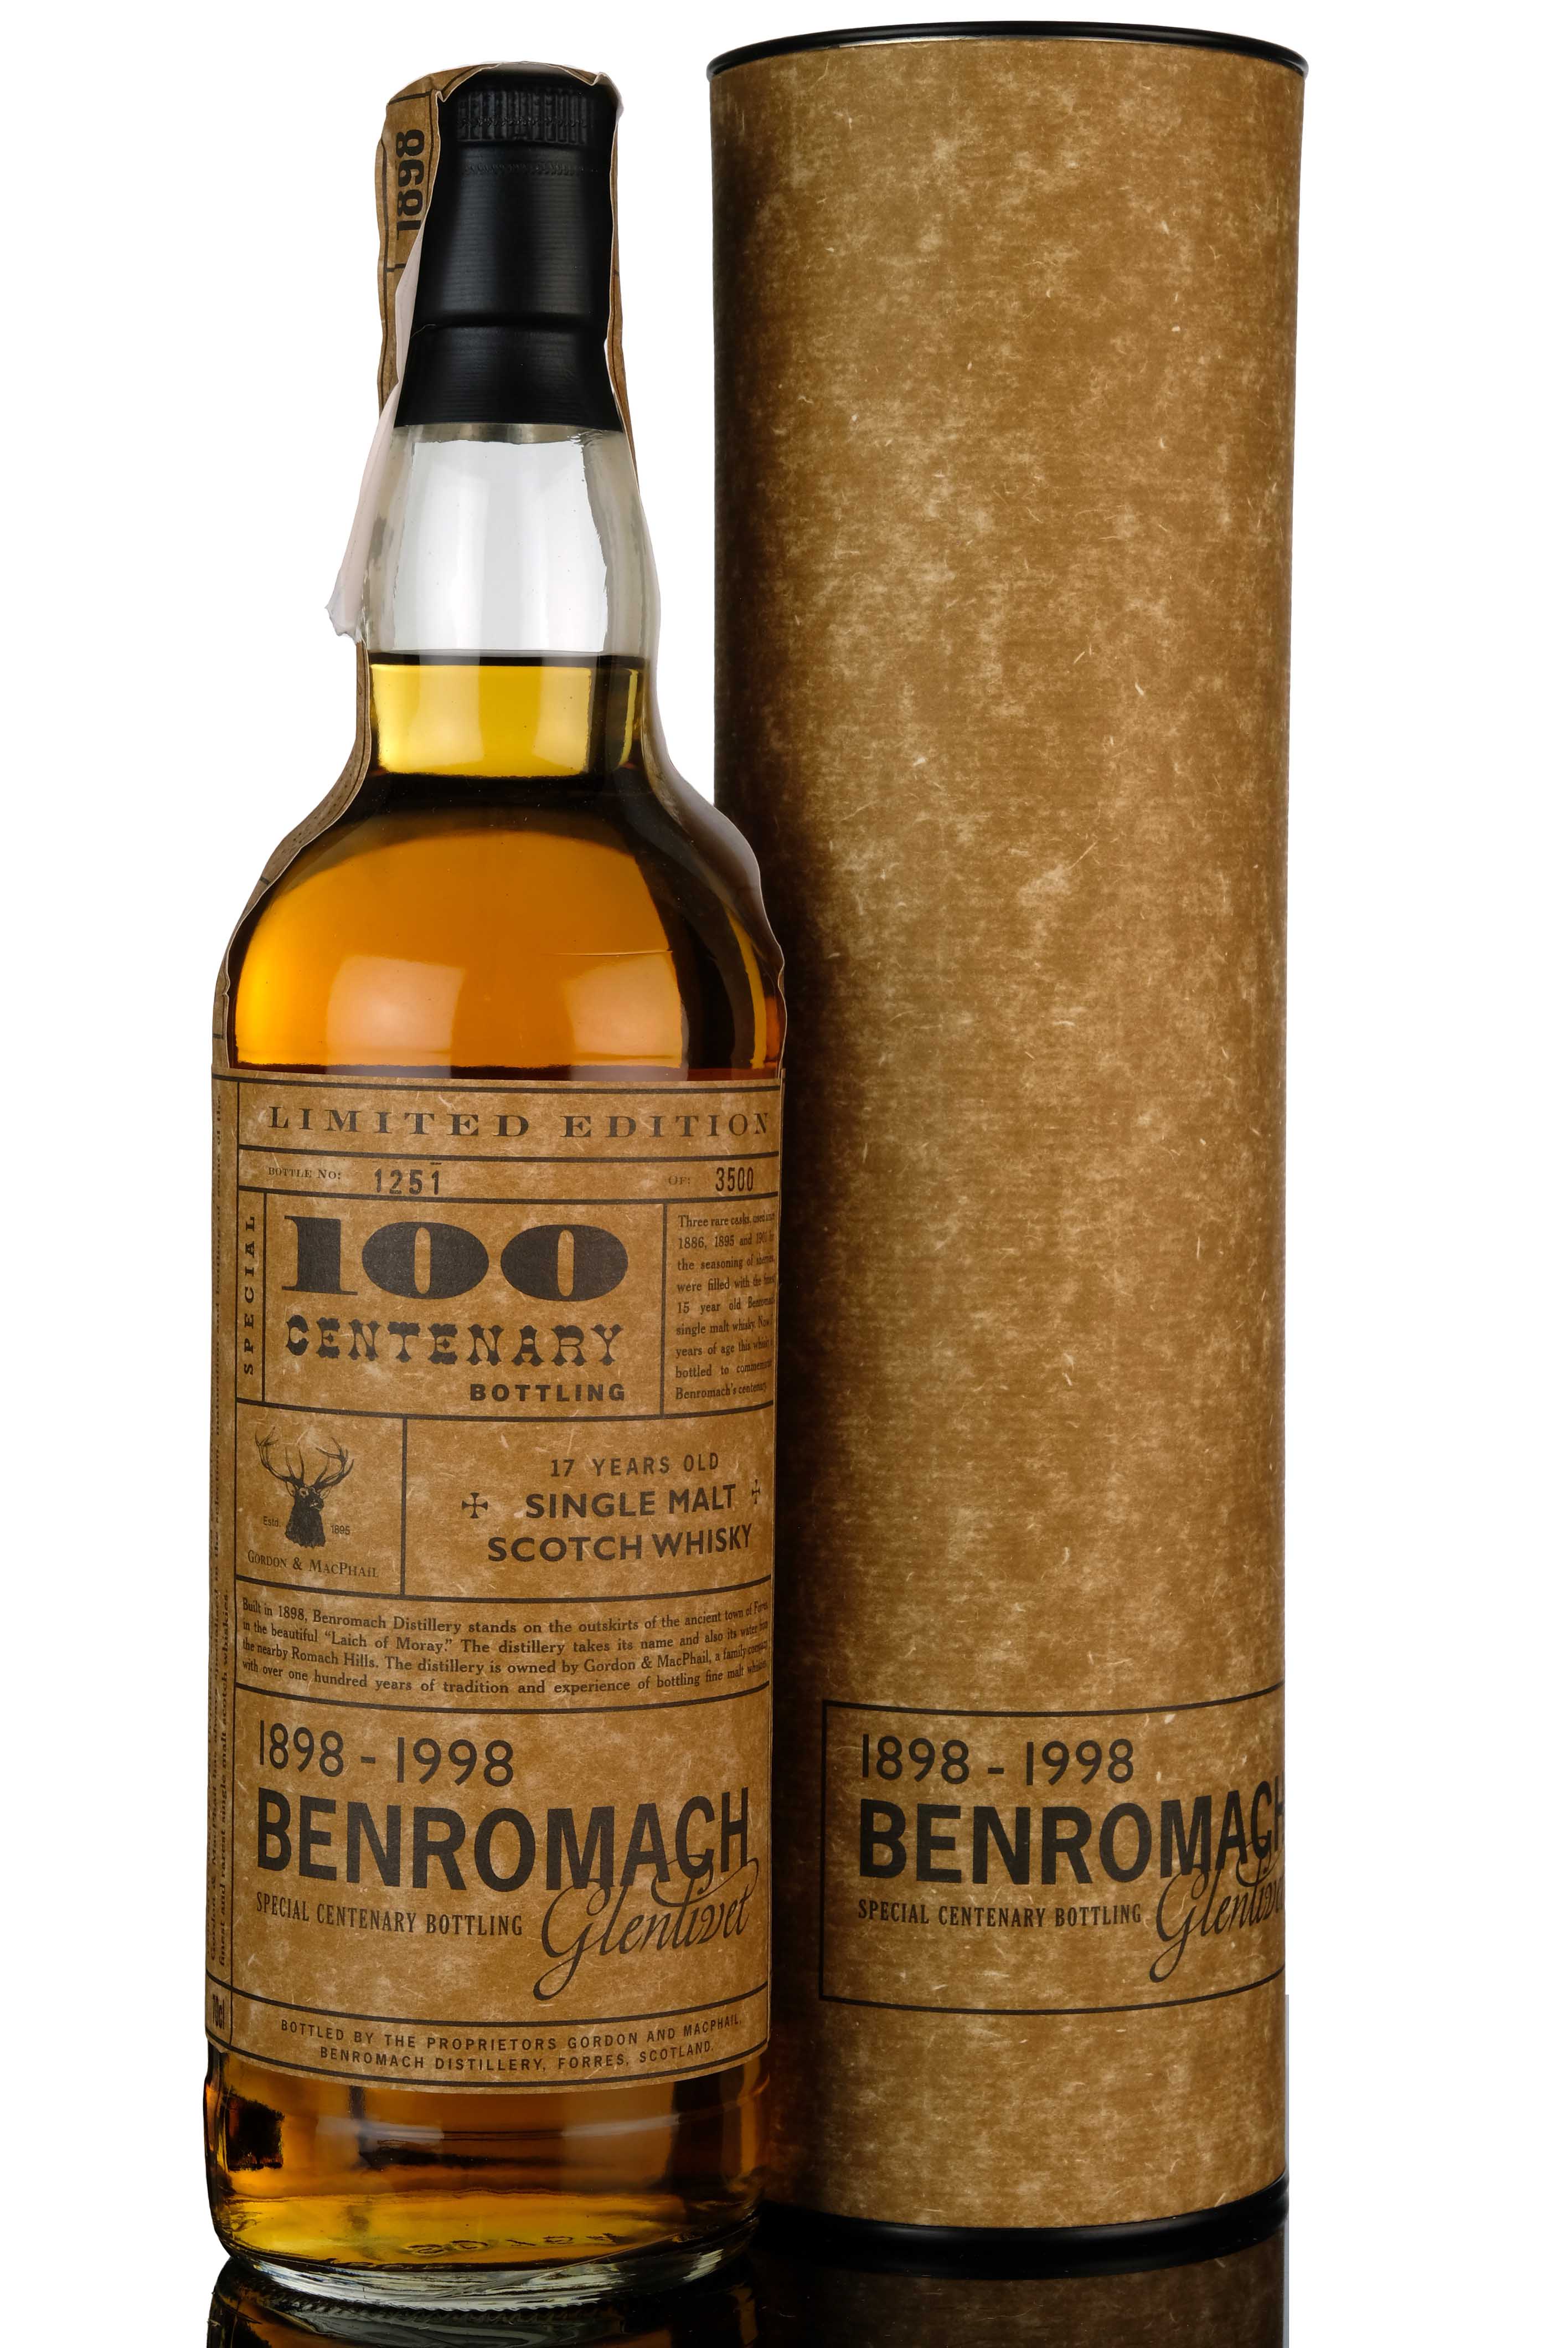 Benromach 17 Year Old - Centenary - 1898-1998